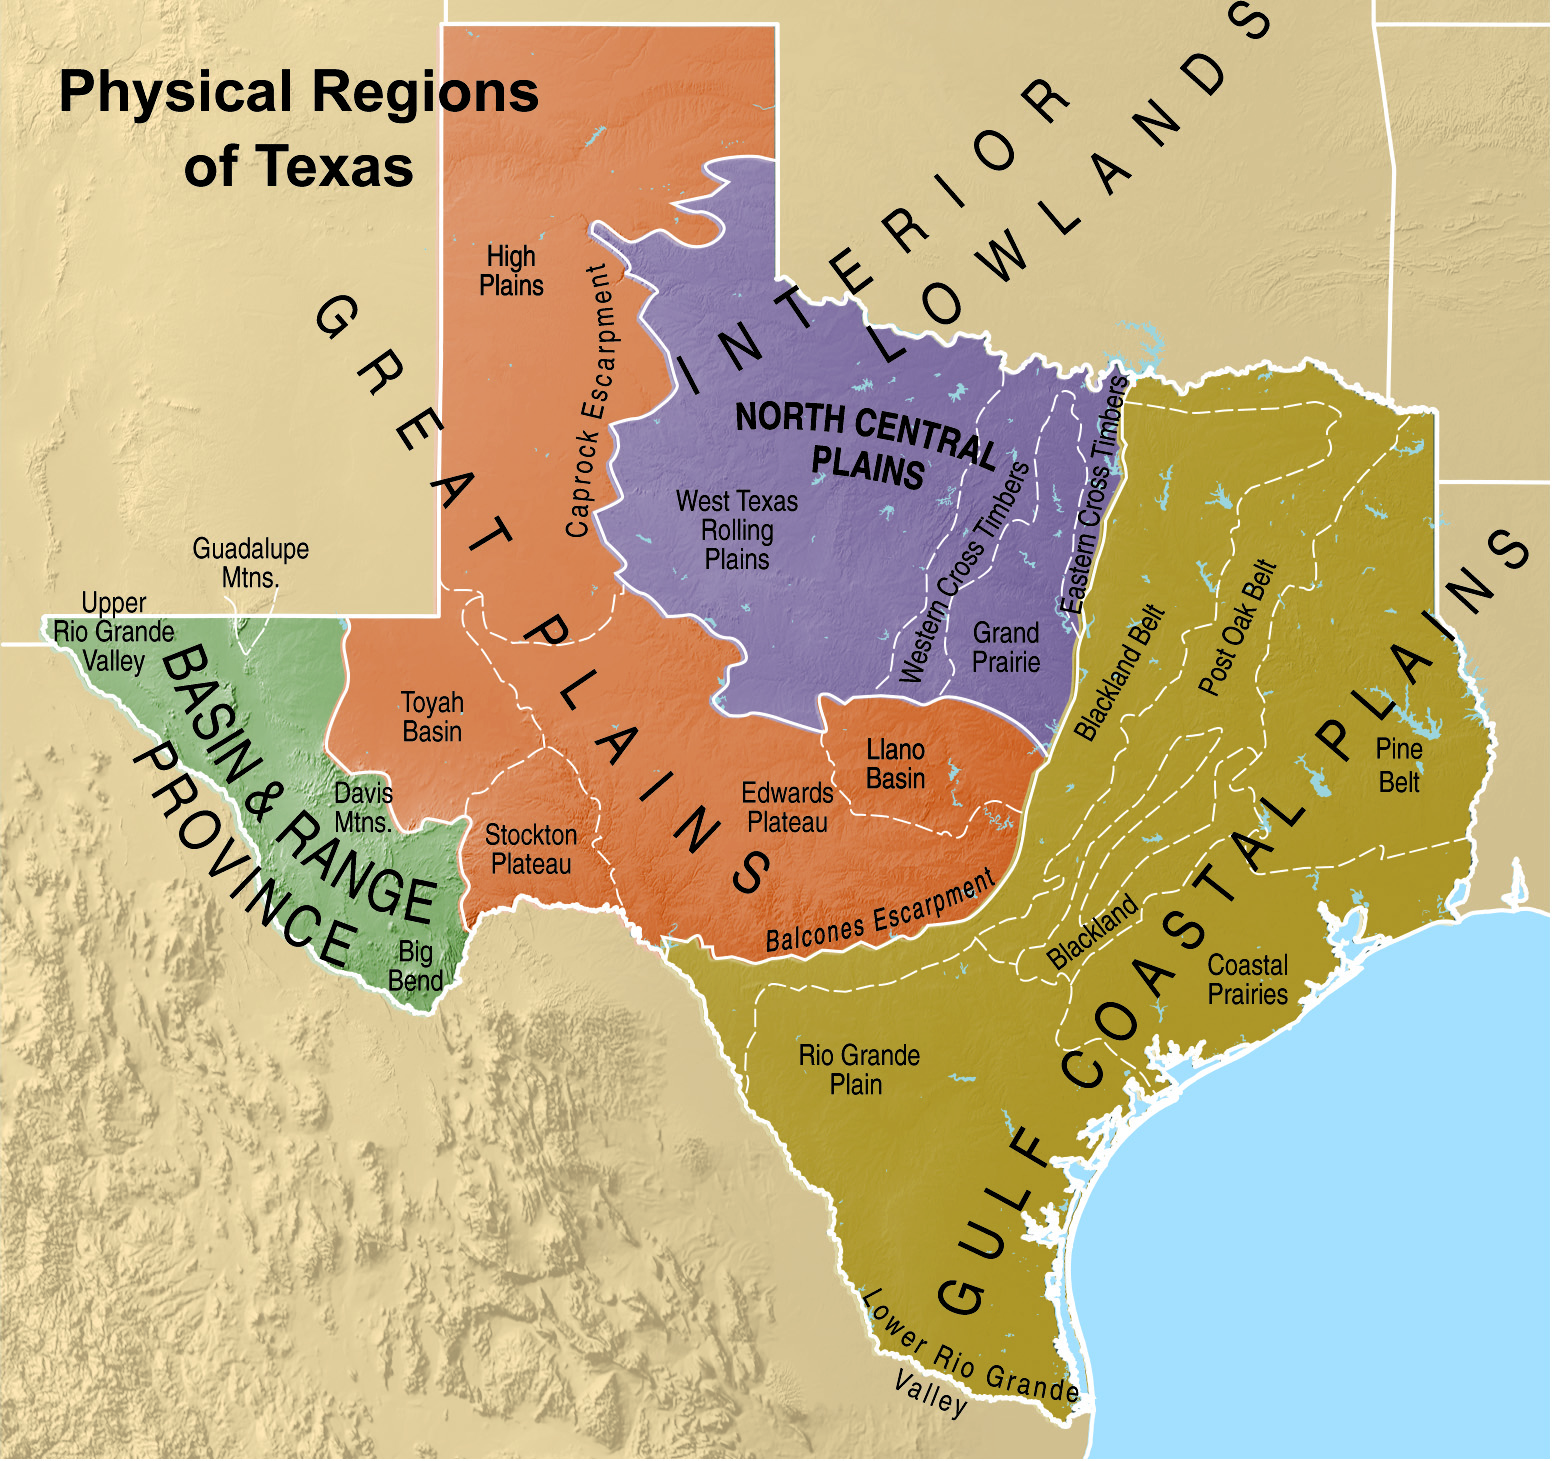 Physical Regions of Texas